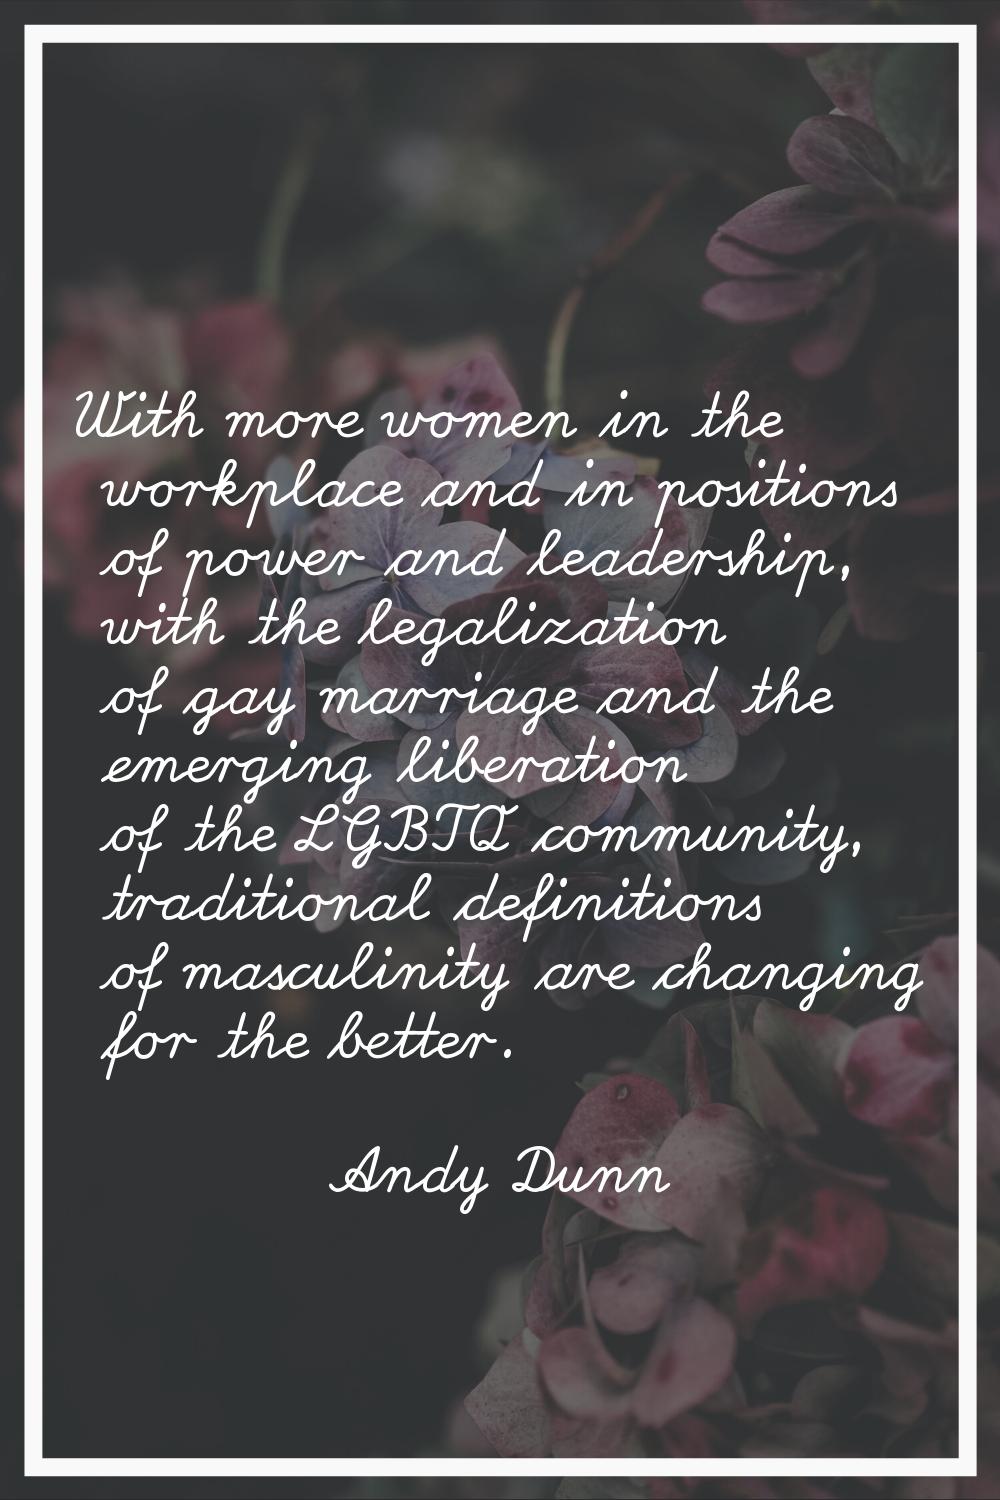 With more women in the workplace and in positions of power and leadership, with the legalization of